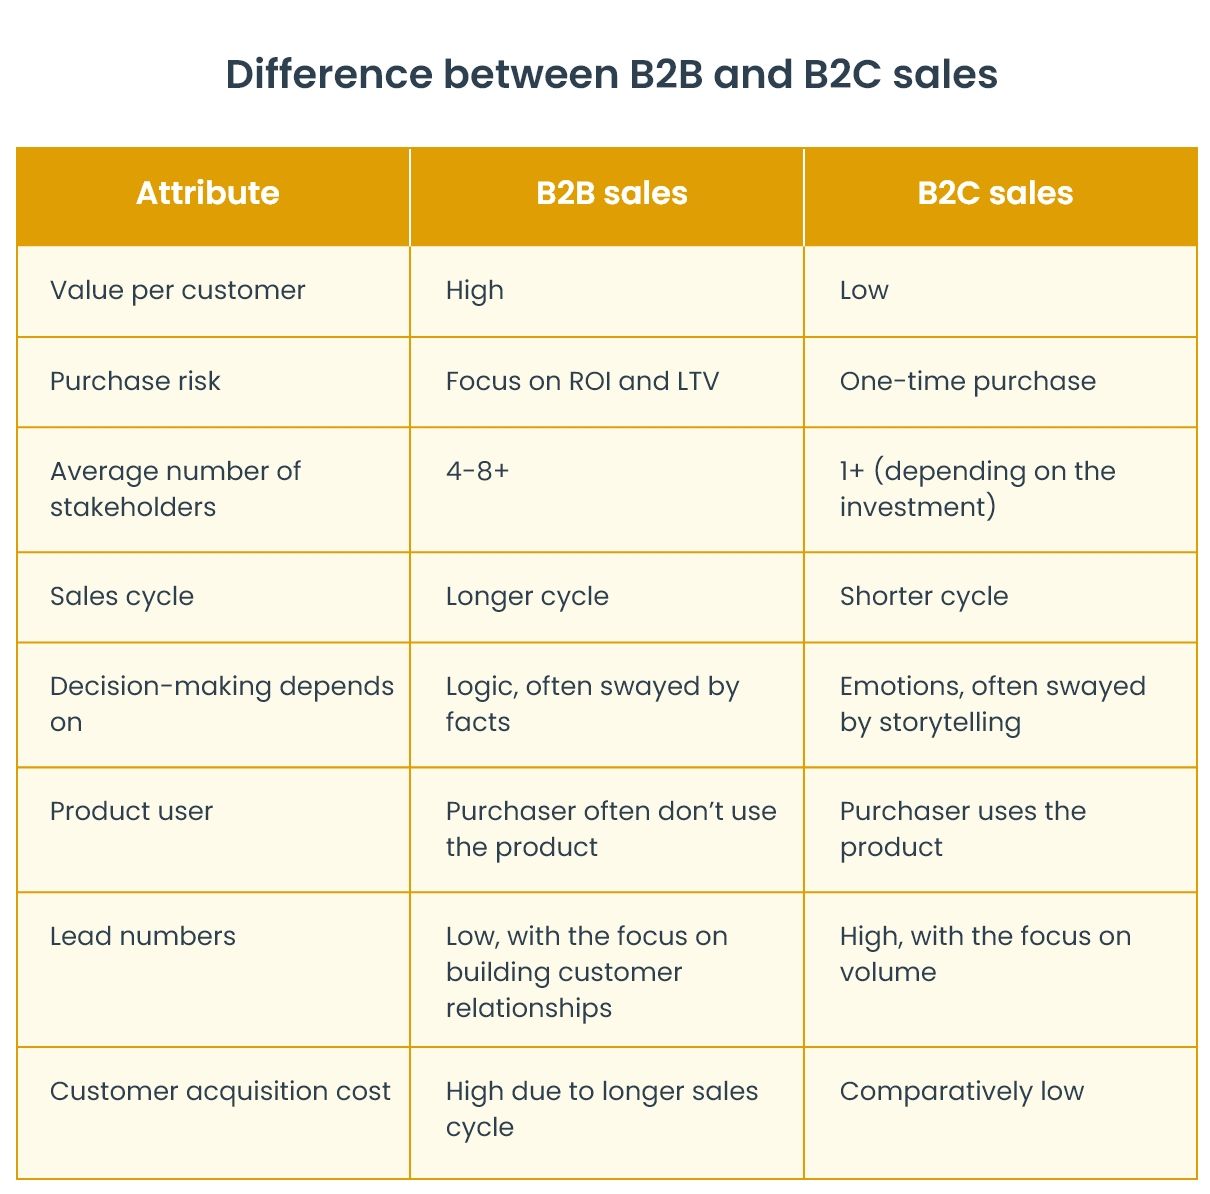 Difference between B2B and B2C sales